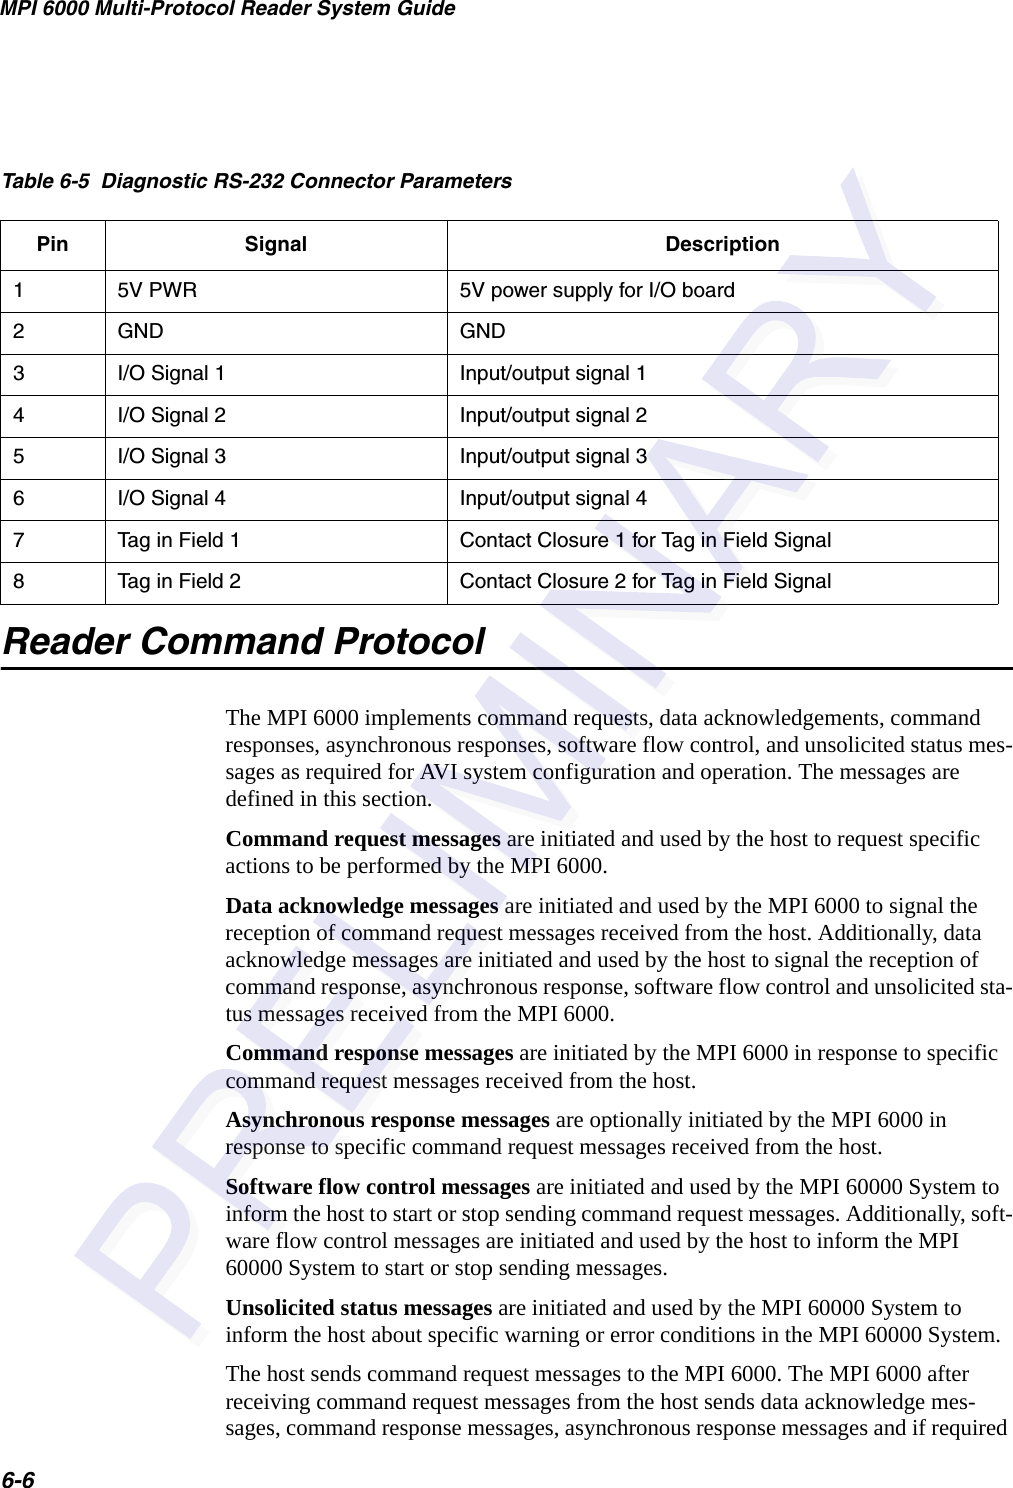 MPI 6000 Multi-Protocol Reader System Guide6-6Reader Command ProtocolThe MPI 6000 implements command requests, data acknowledgements, command responses, asynchronous responses, software flow control, and unsolicited status mes-sages as required for AVI system configuration and operation. The messages are defined in this section.Command request messages are initiated and used by the host to request specific actions to be performed by the MPI 6000.Data acknowledge messages are initiated and used by the MPI 6000 to signal the reception of command request messages received from the host. Additionally, data acknowledge messages are initiated and used by the host to signal the reception of command response, asynchronous response, software flow control and unsolicited sta-tus messages received from the MPI 6000. Command response messages are initiated by the MPI 6000 in response to specific command request messages received from the host.Asynchronous response messages are optionally initiated by the MPI 6000 in response to specific command request messages received from the host.Software flow control messages are initiated and used by the MPI 60000 System to inform the host to start or stop sending command request messages. Additionally, soft-ware flow control messages are initiated and used by the host to inform the MPI 60000 System to start or stop sending messages.Unsolicited status messages are initiated and used by the MPI 60000 System to inform the host about specific warning or error conditions in the MPI 60000 System.The host sends command request messages to the MPI 6000. The MPI 6000 after receiving command request messages from the host sends data acknowledge mes-sages, command response messages, asynchronous response messages and if required Table 6-5  Diagnostic RS-232 Connector ParametersPin Signal Description15V PWR 5V power supply for I/O board2GND GND3I/O Signal 1 Input/output signal 14I/O Signal 2 Input/output signal 25I/O Signal 3 Input/output signal 36I/O Signal 4 Input/output signal 47Tag in Field 1 Contact Closure 1 for Tag in Field Signal8Tag in Field 2 Contact Closure 2 for Tag in Field Signal